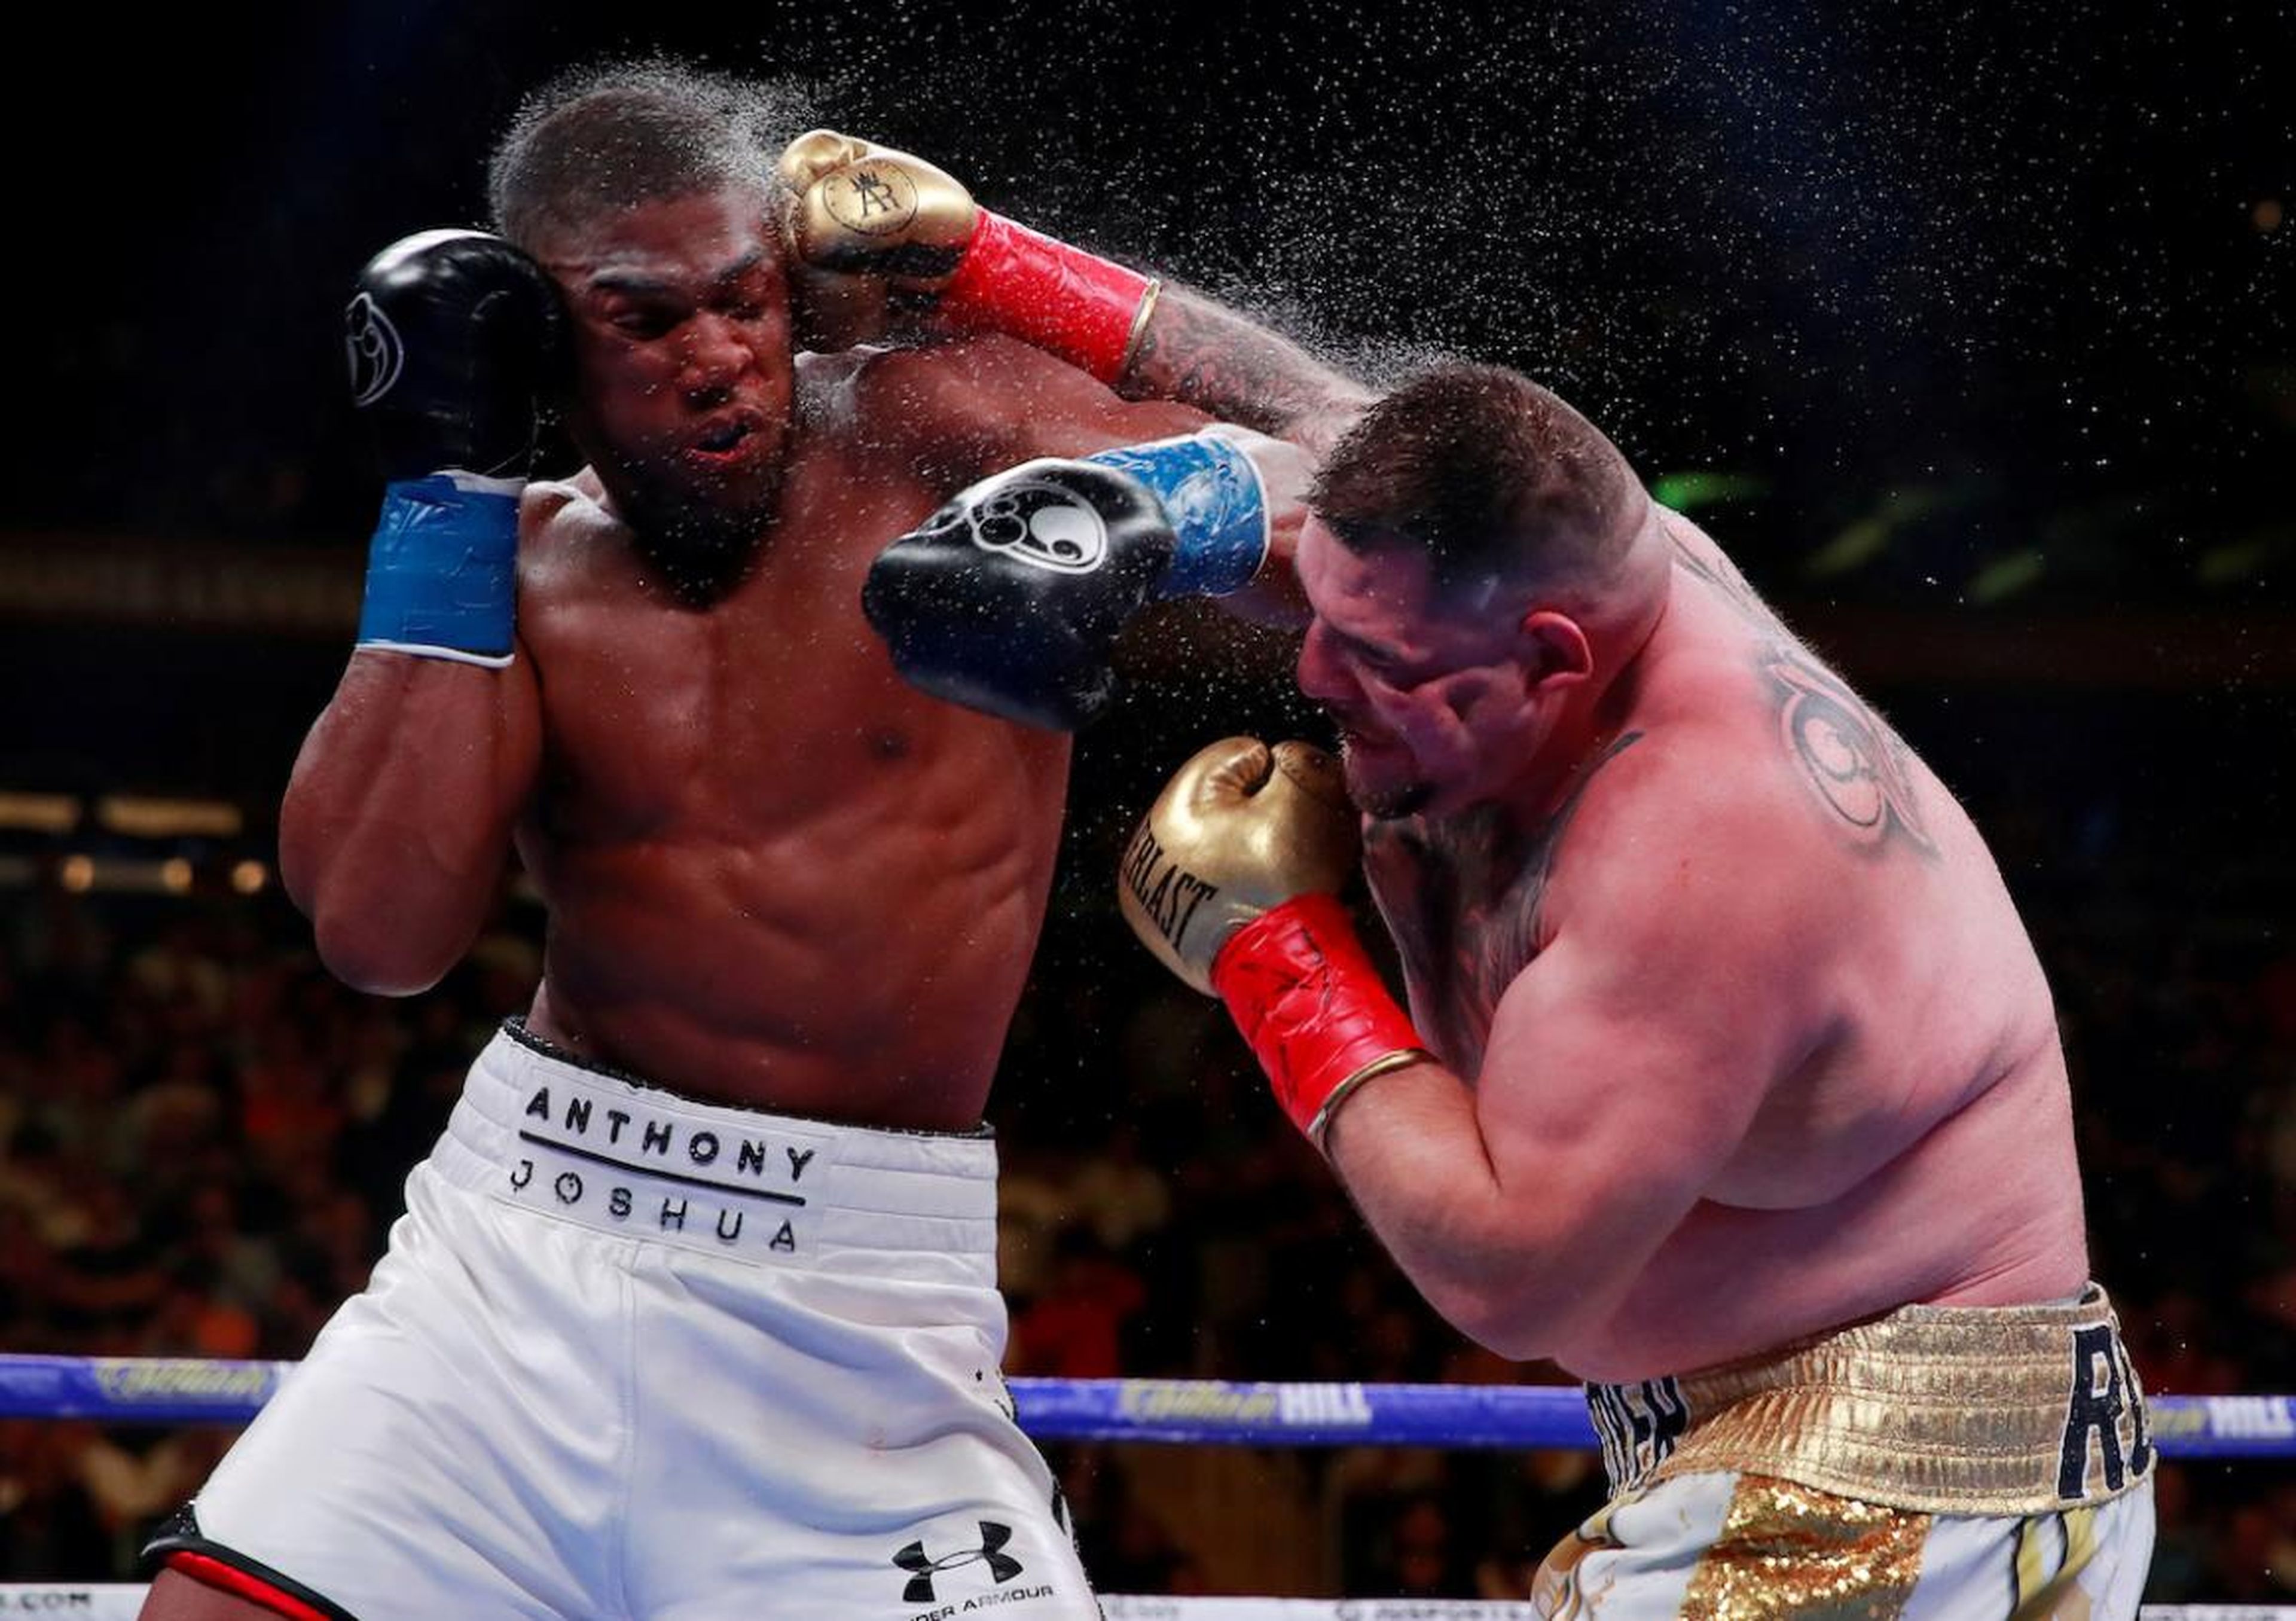 Andy Ruiz Jr fights Anthony Joshua for the WBA Super, IBF, WBO, & IBO World Heavyweight Titles in New York on June 1. The bout was run by Ruiz, who was defeated by Joshua in a rematch in Saudi Arabia in December, dubbed the "Clash